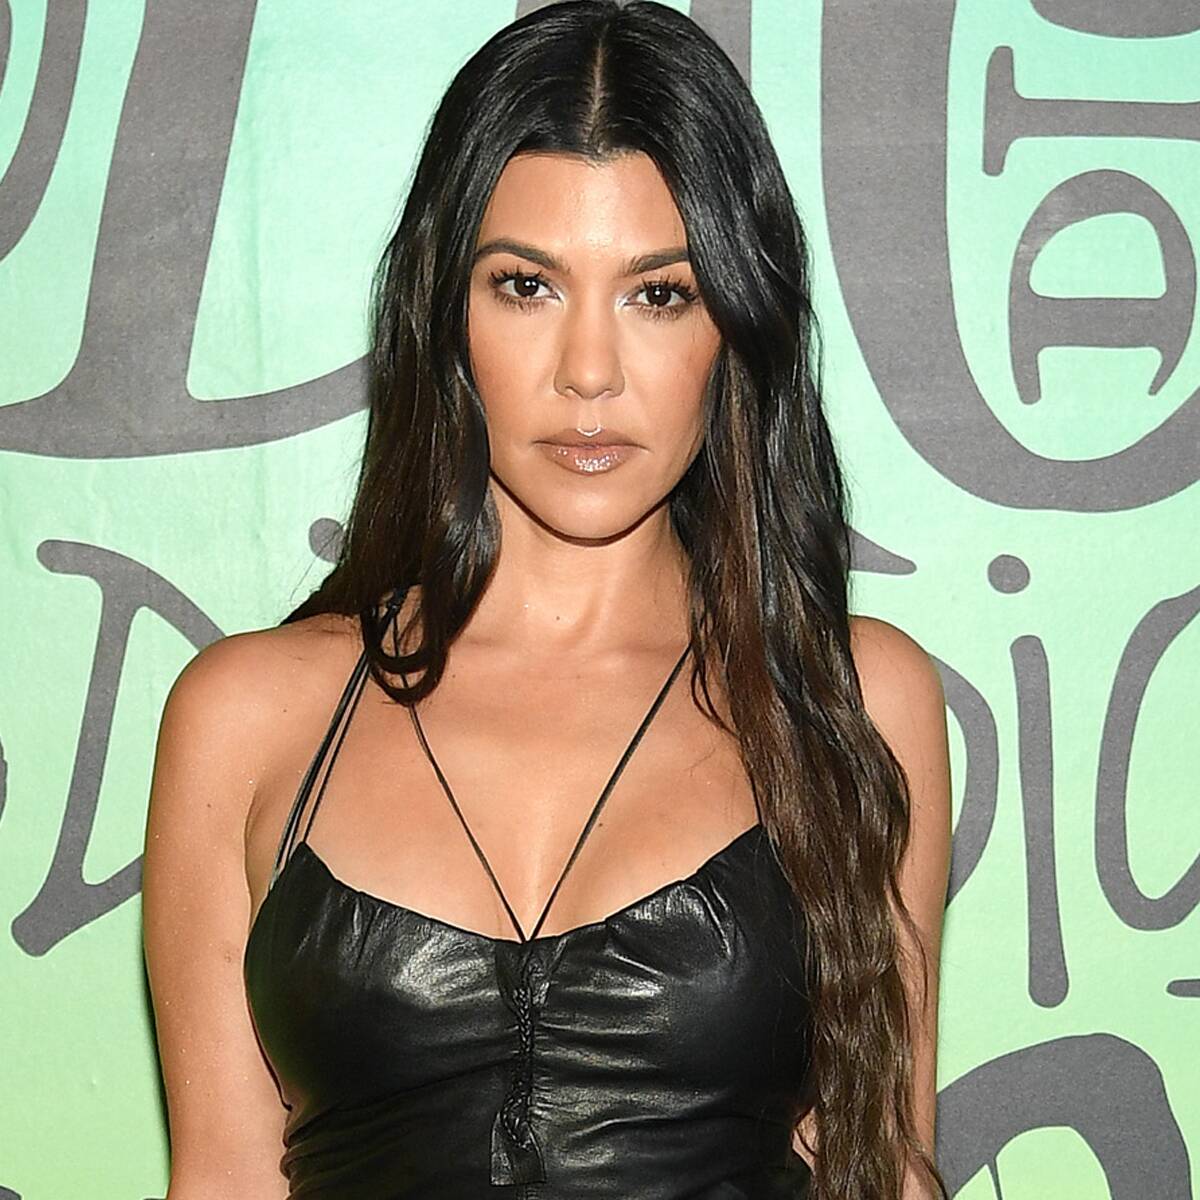 Kourtney Kardashian Calls Out Kim, Kylie and Kendall Jenner With Lingerie Pic